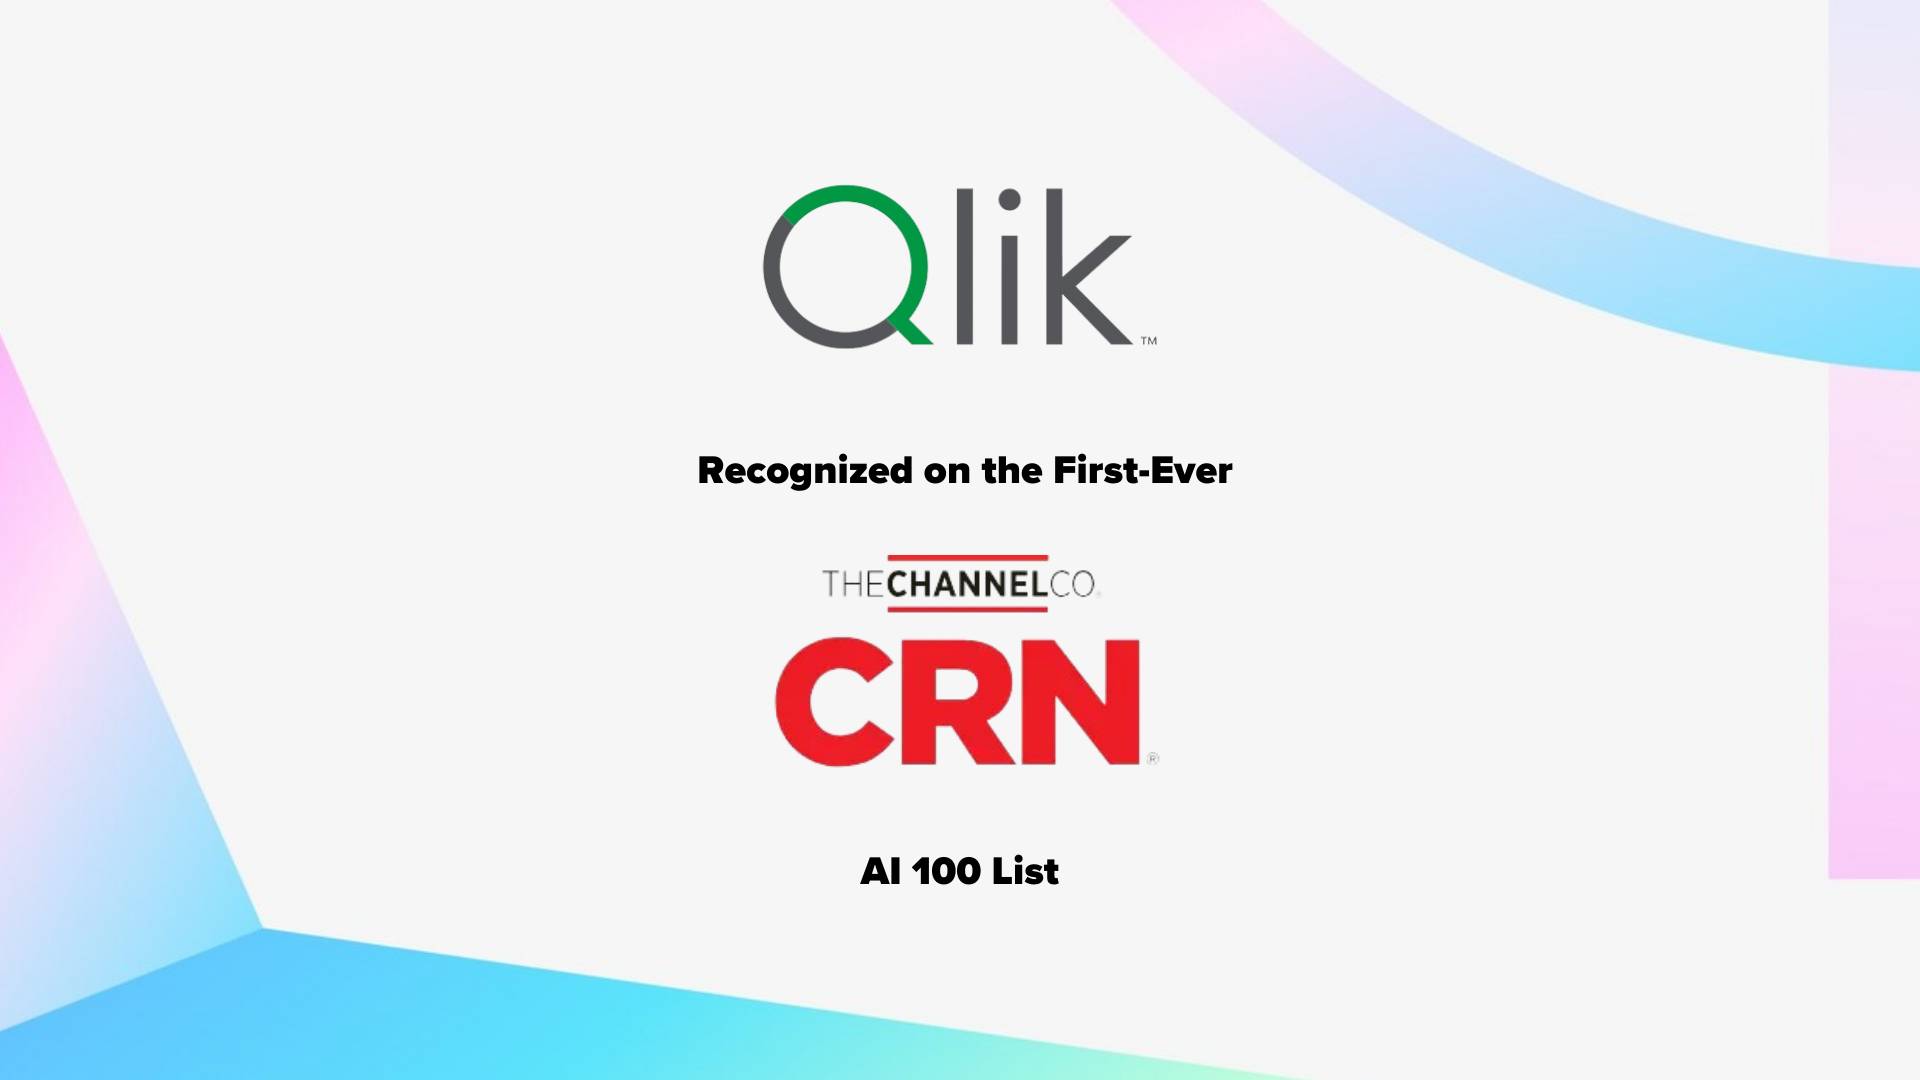 Qlik Recognized on the First-Ever CRN AI 100 List